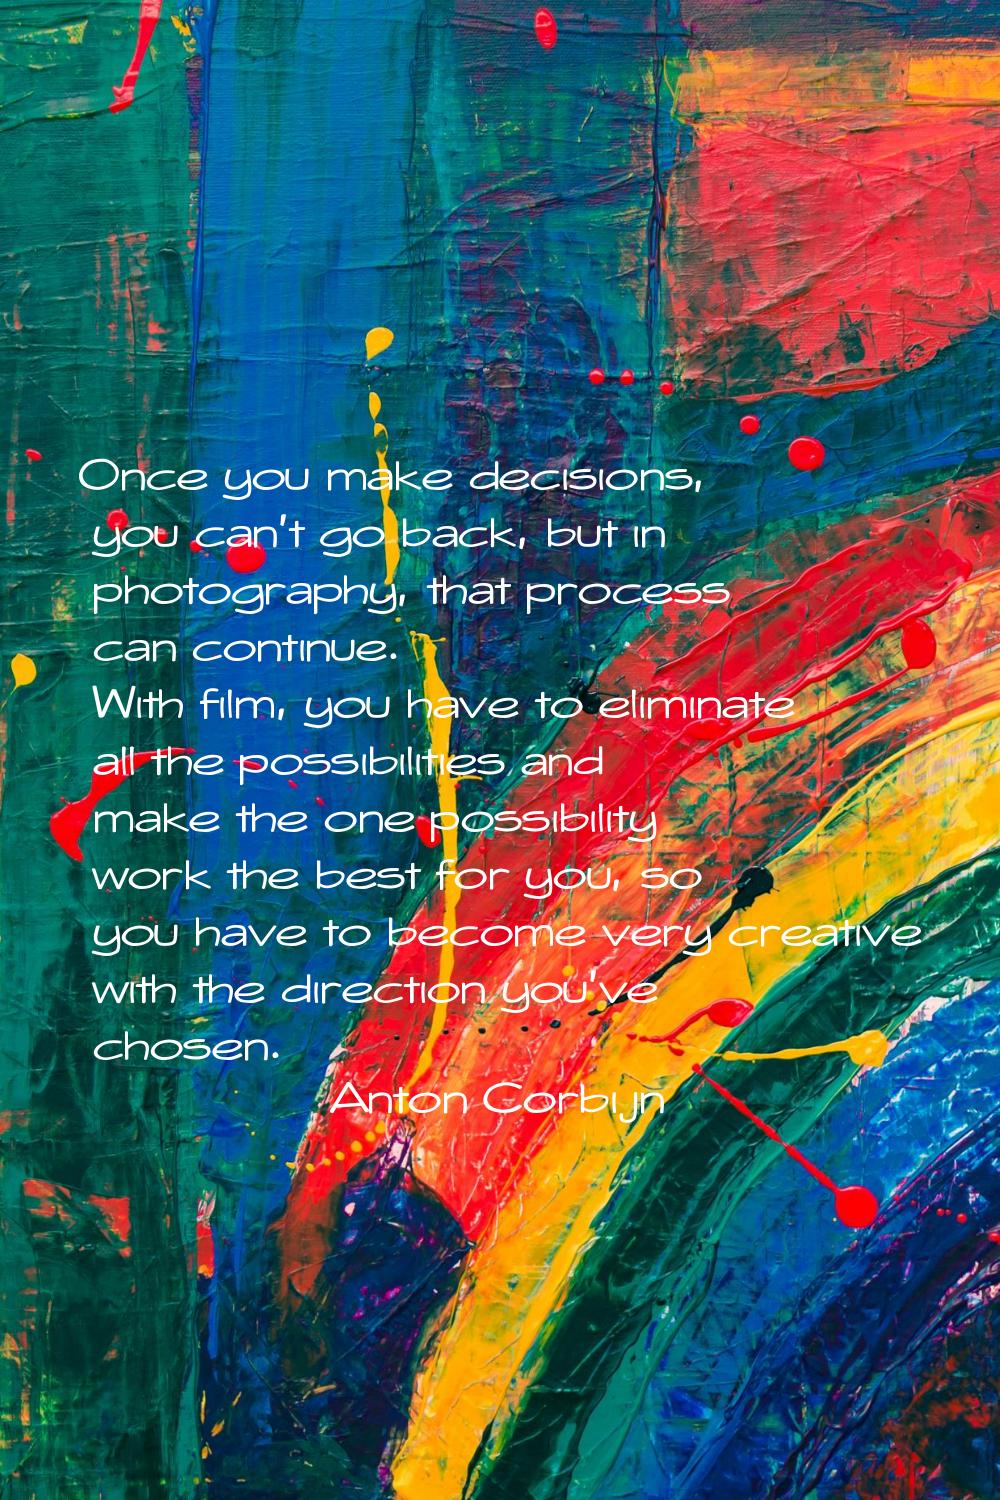 Once you make decisions, you can't go back, but in photography, that process can continue. With fil